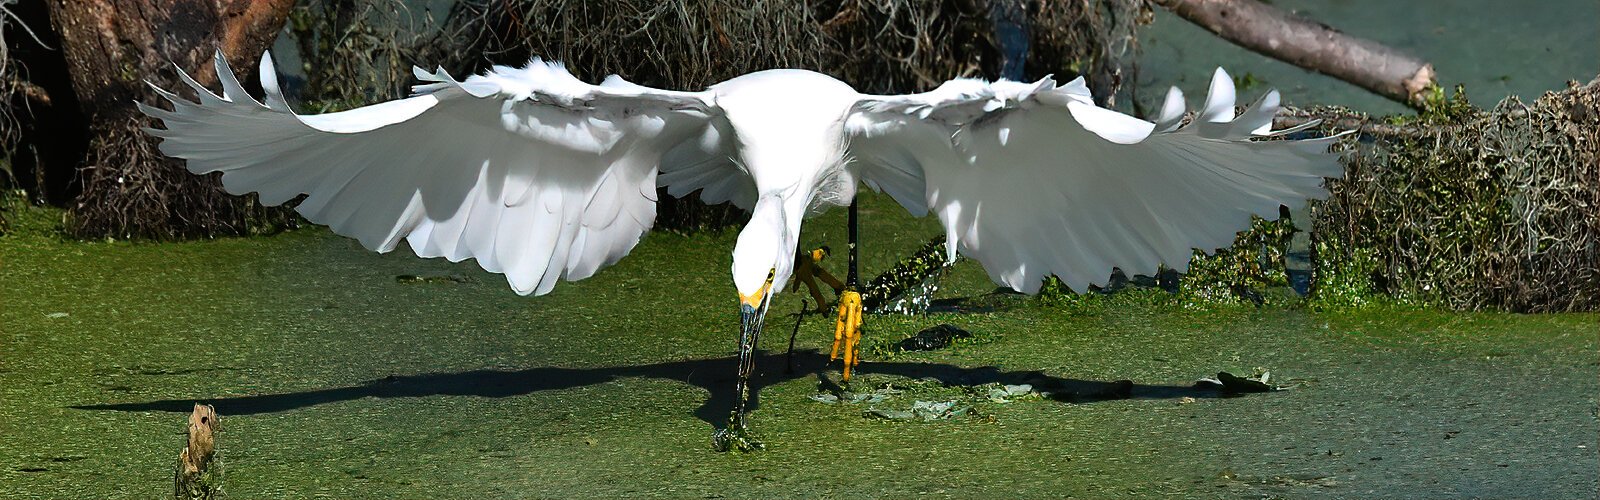 A snowy egret plunges its bill through the green vegetation covering the marsh in an attempt to catch a fish.